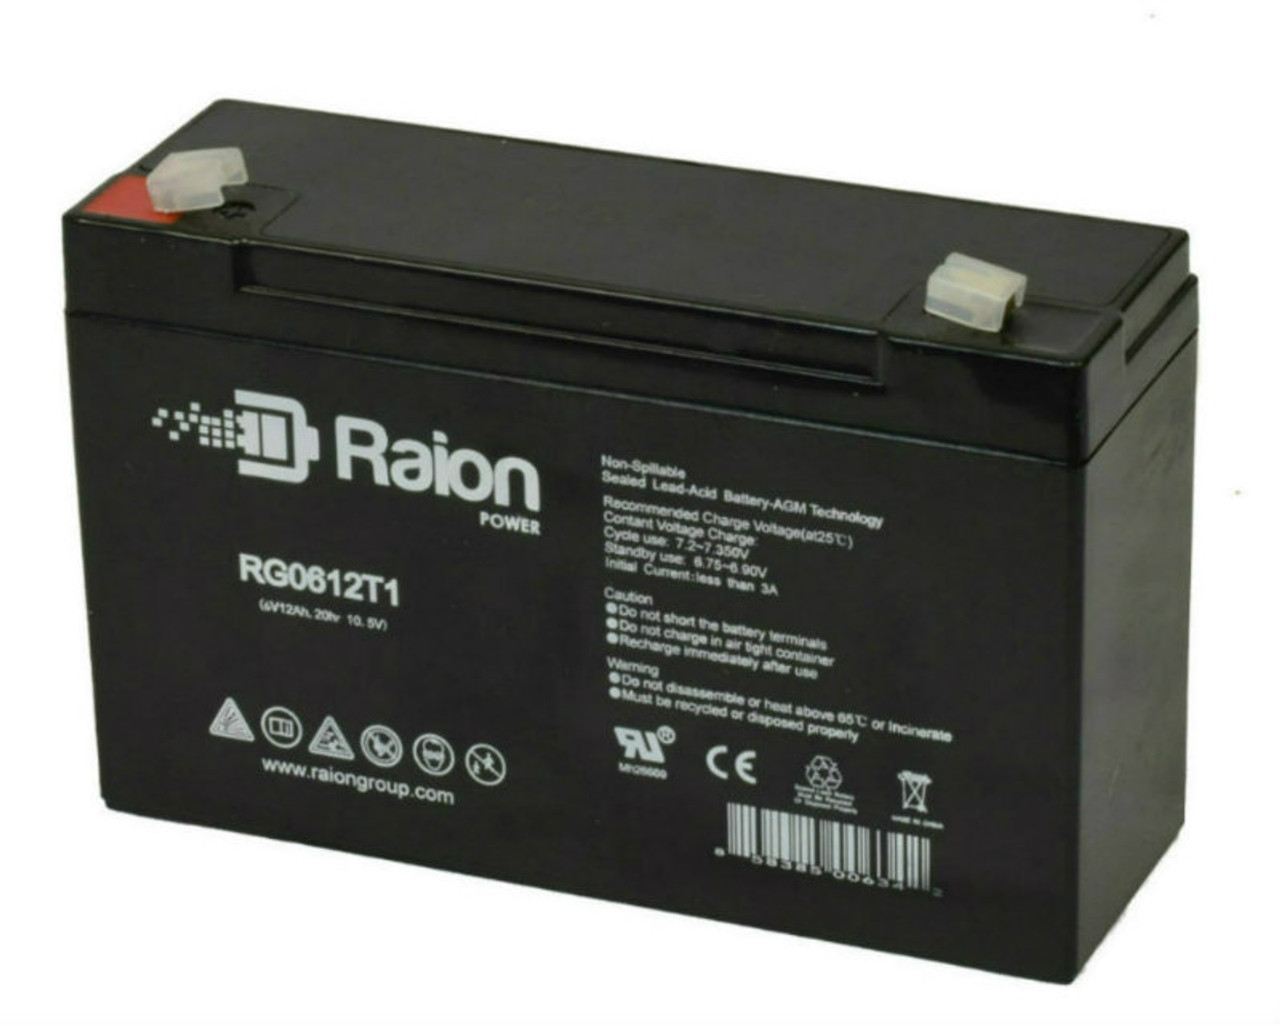 Raion Power RG06120T1 Replacement 6V 12Ah Emergency Light Battery for Hubbell 12-631